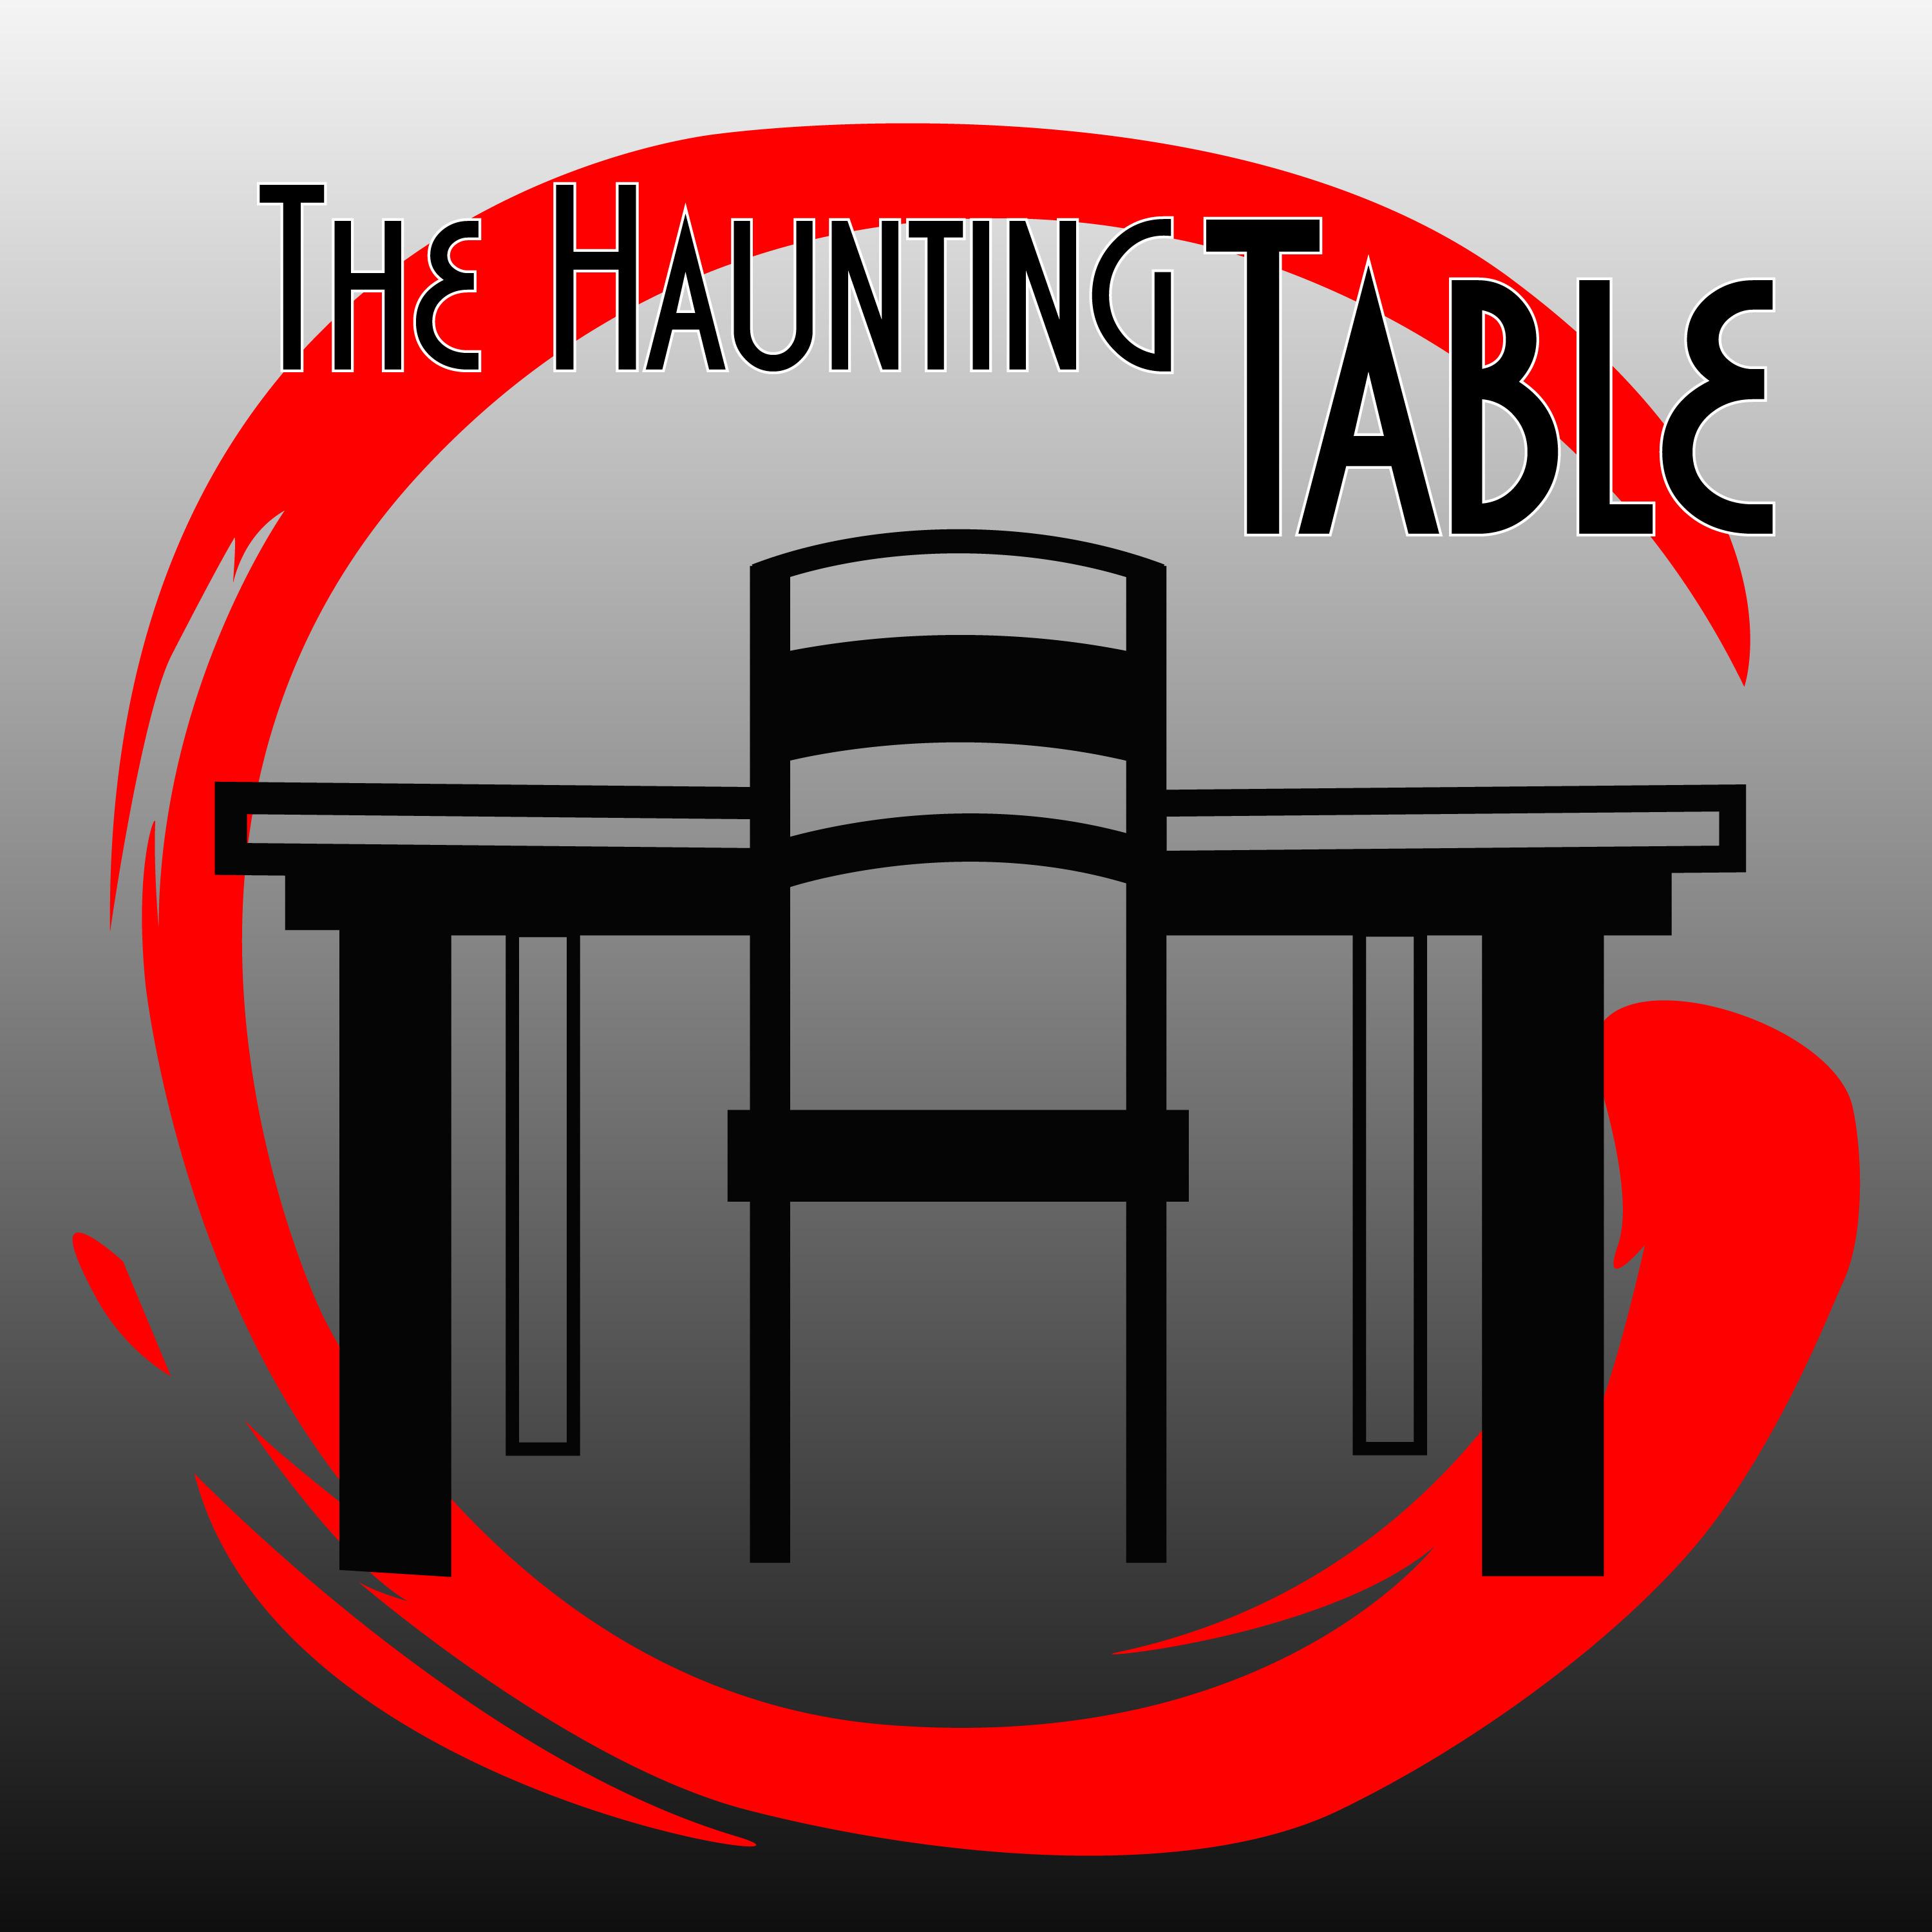 The Haunting Table